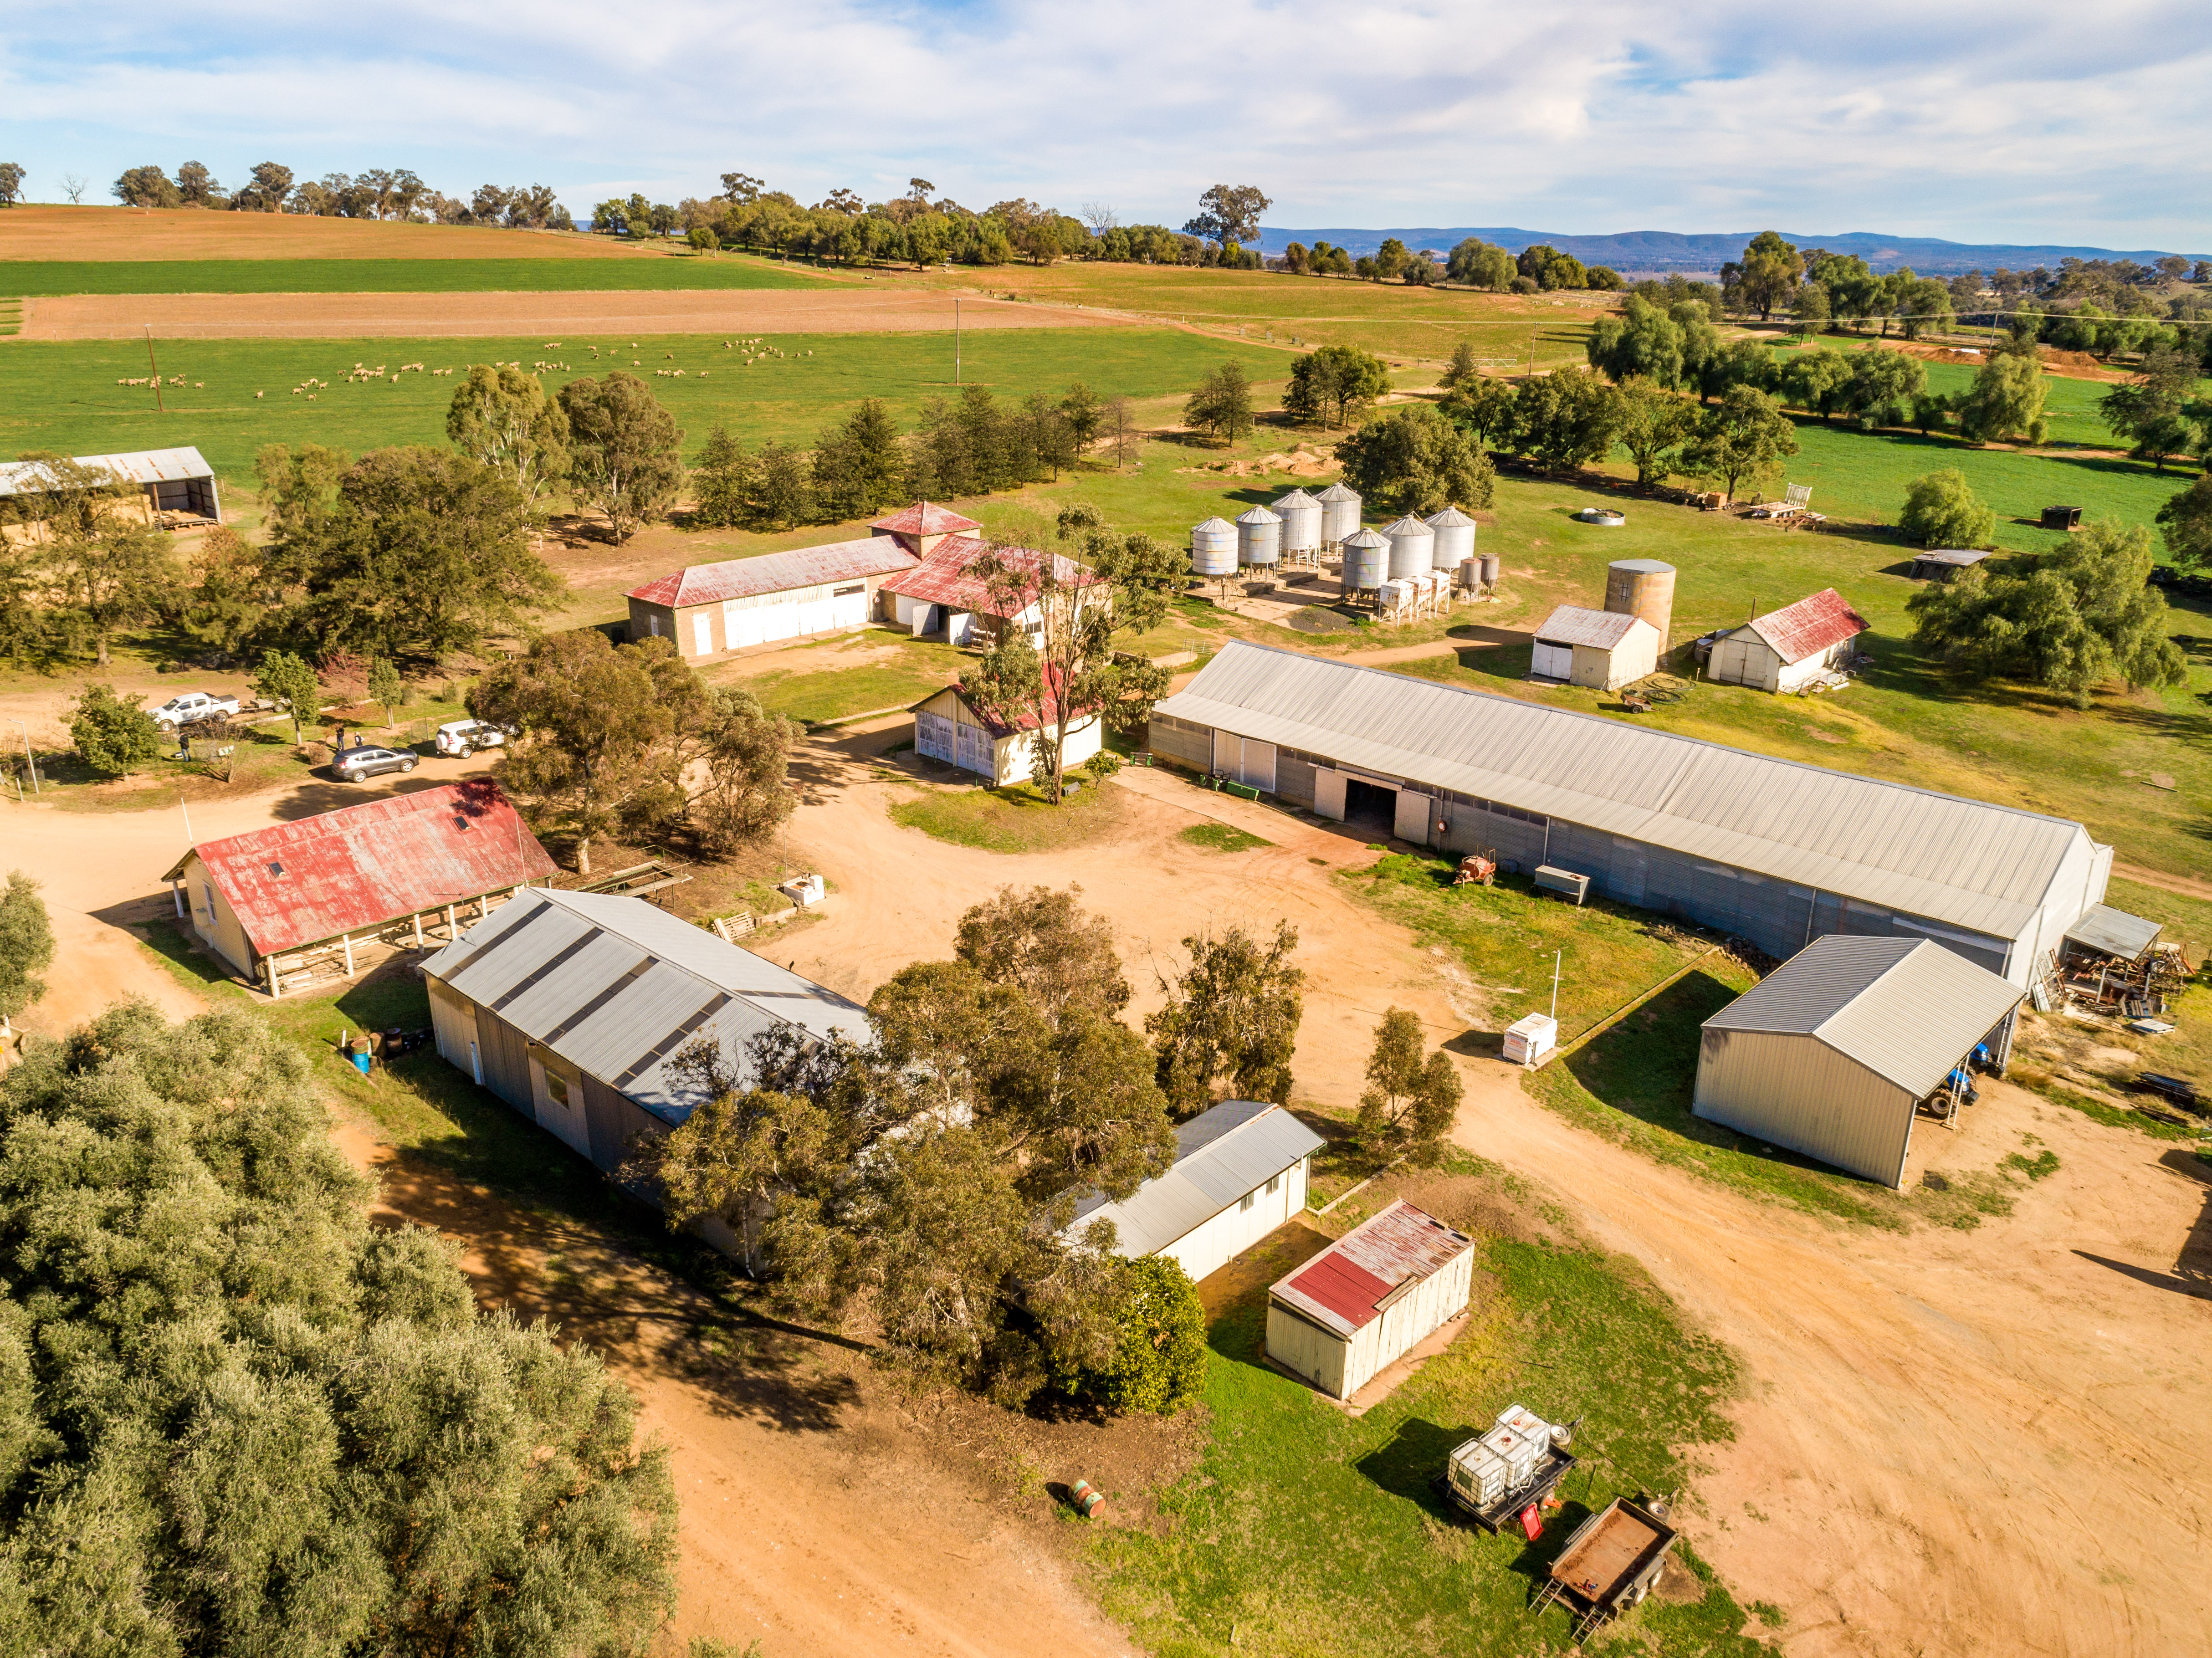 Aerial image of Cowra Agricultural Research & Advisory Station